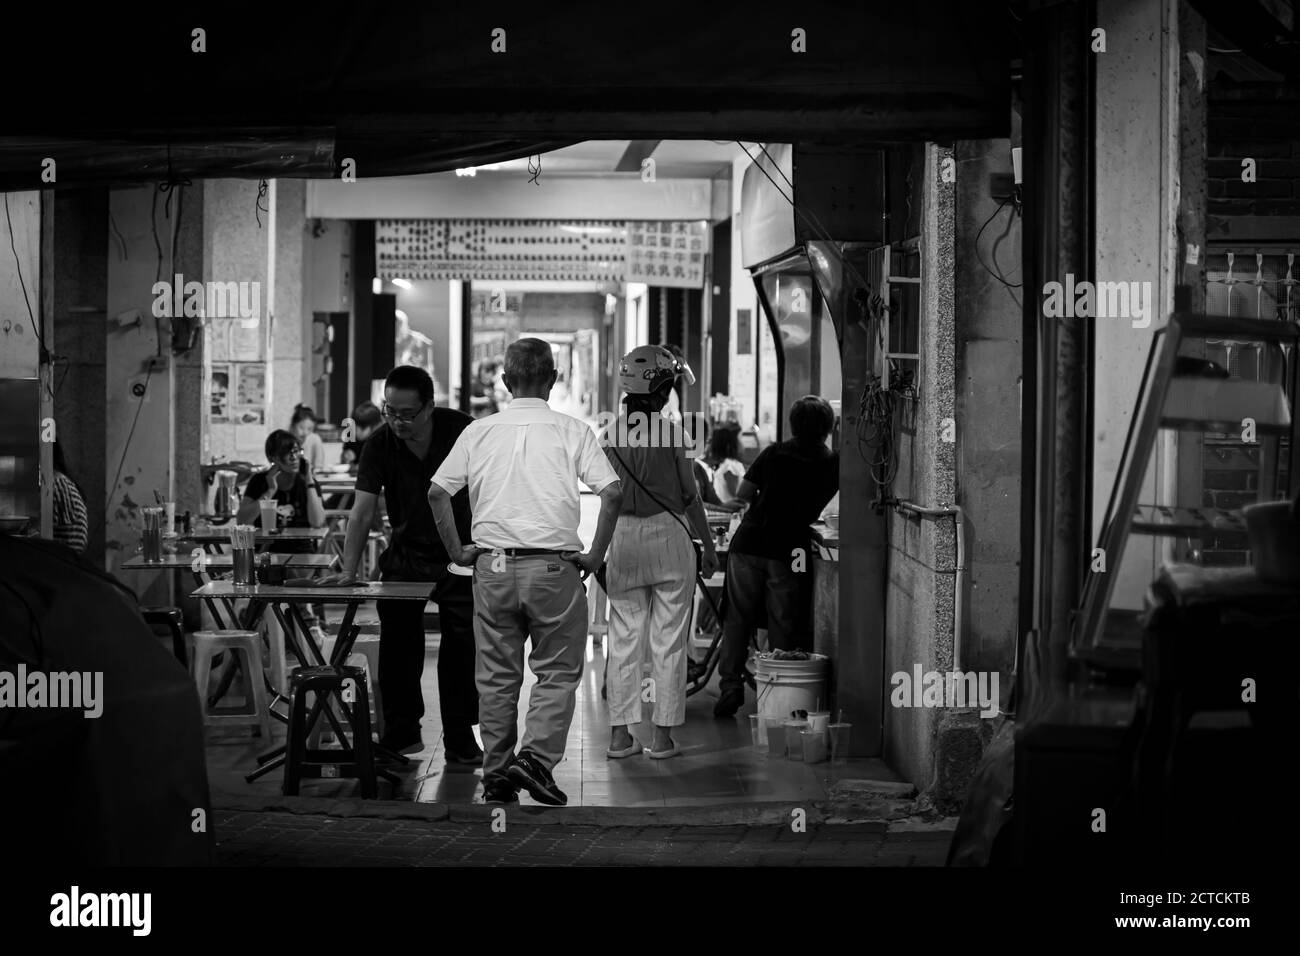 A man with his back walking through a food stand at arcade in Tainan street. Stock Photo